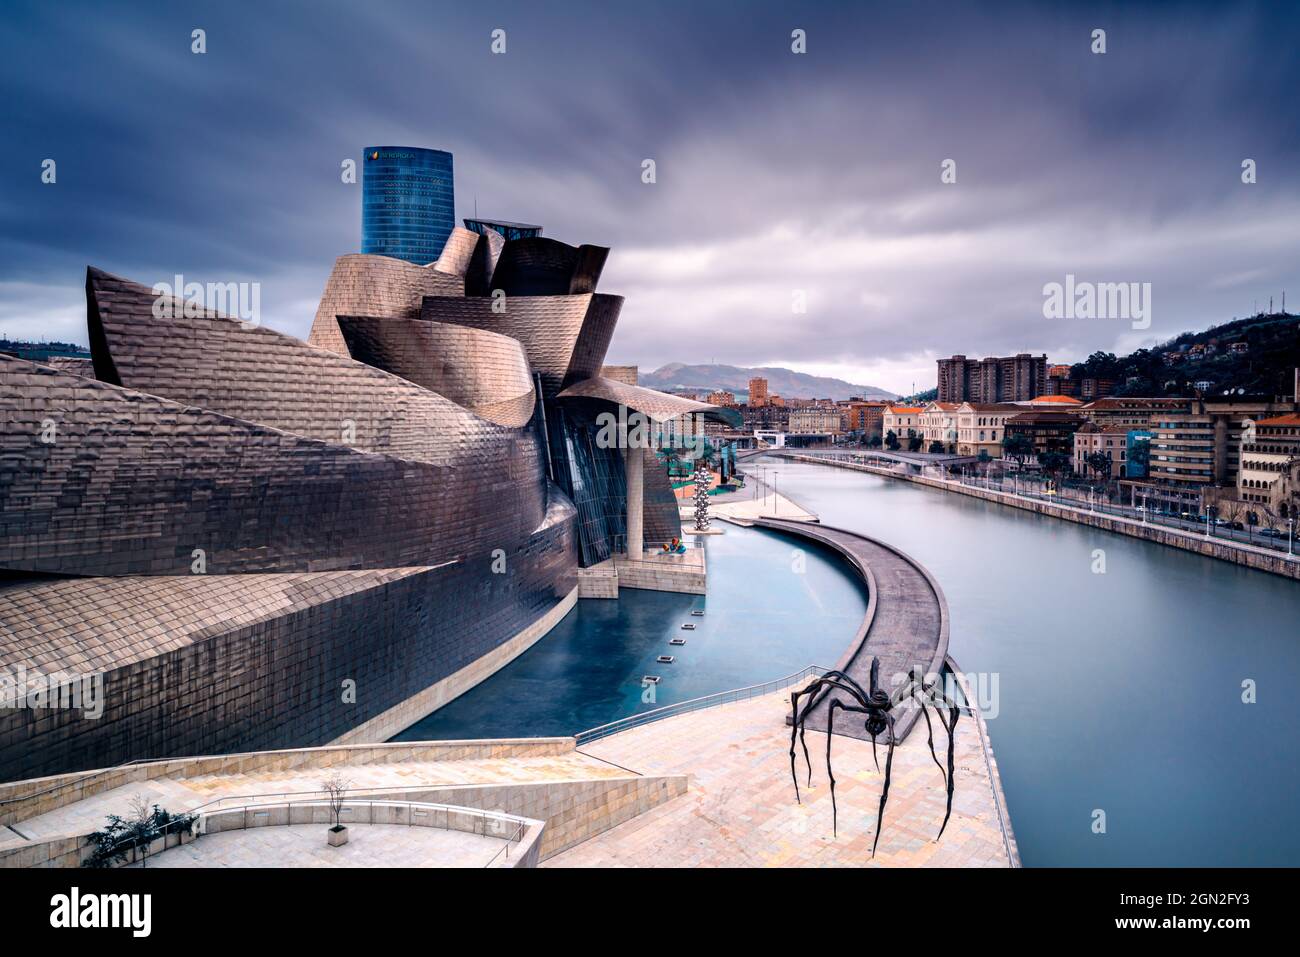 SPAIN, SPANISH BASQUE COUNTRY. BISCAY. BILBAO. NORTH FACADE OF THE GUGGENHEIM MUSEUM IN BILBAO (ARCHITECT FRANK GEHRY) WITH A VIEW OF THE SCULPTURE OF Stock Photo